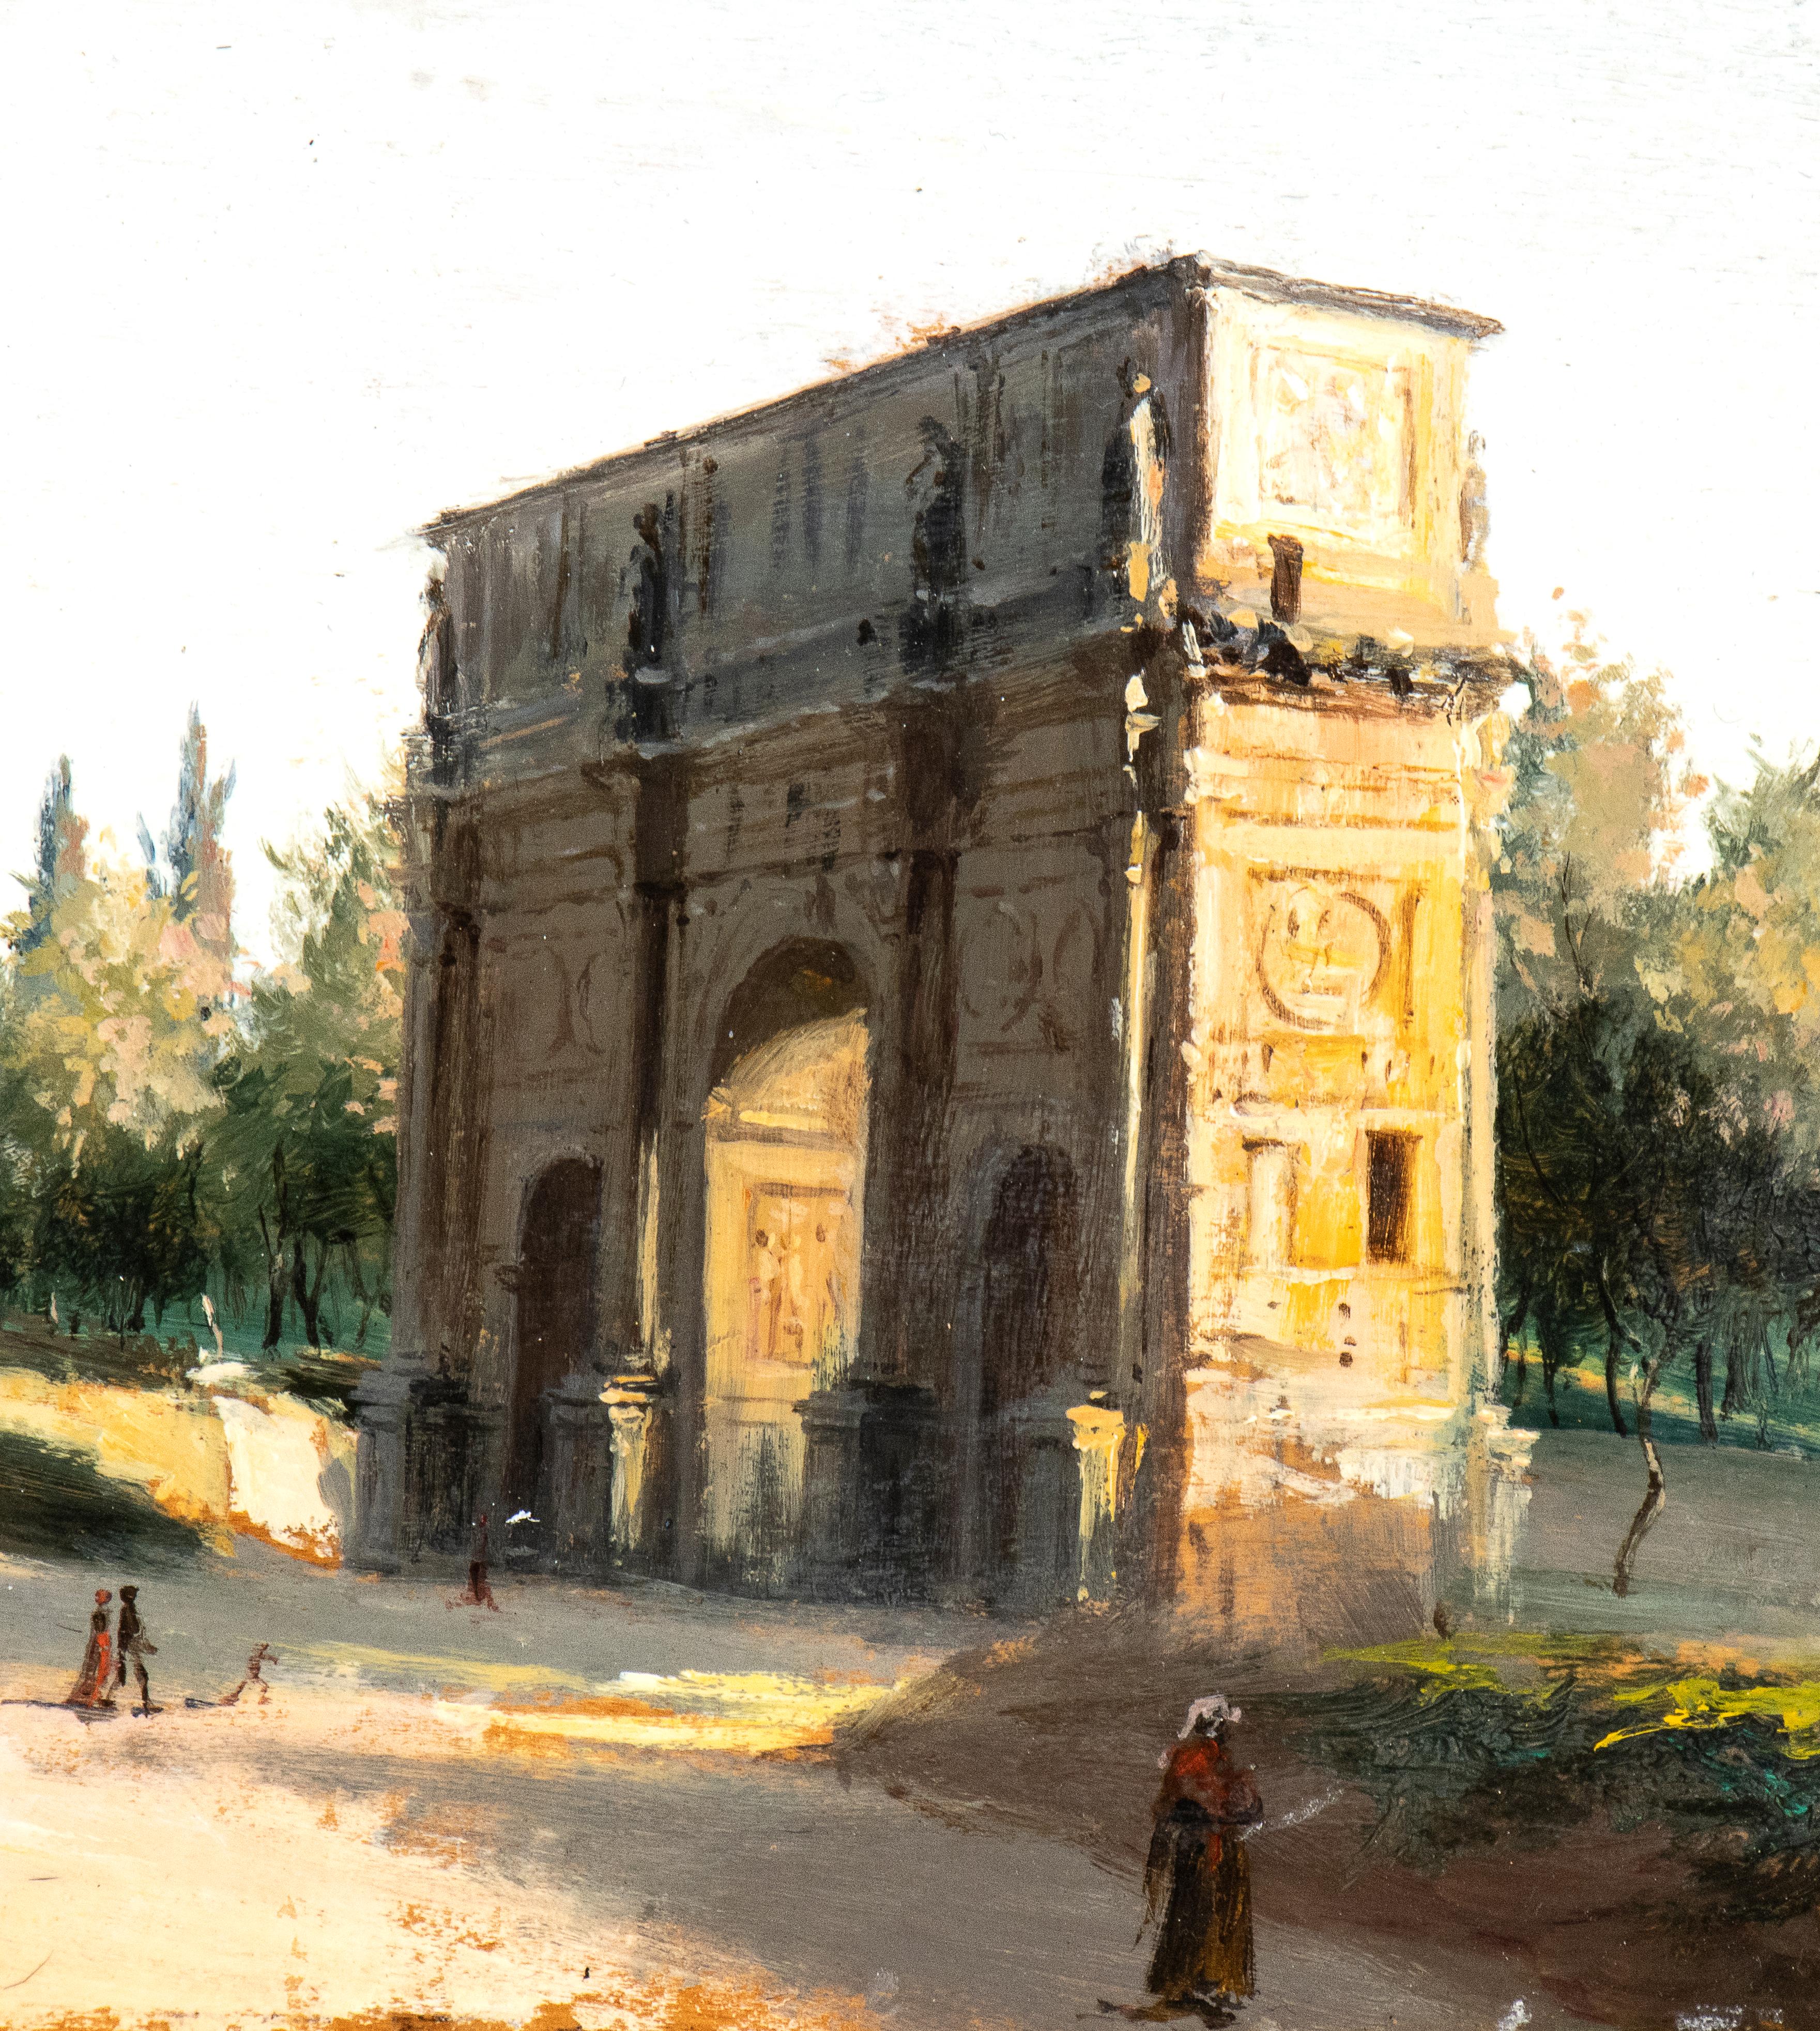 Italian Landscape Oil Paint on Board View of Arch of Constantine and Meta Sudans - Other Art Style Painting by Unknown